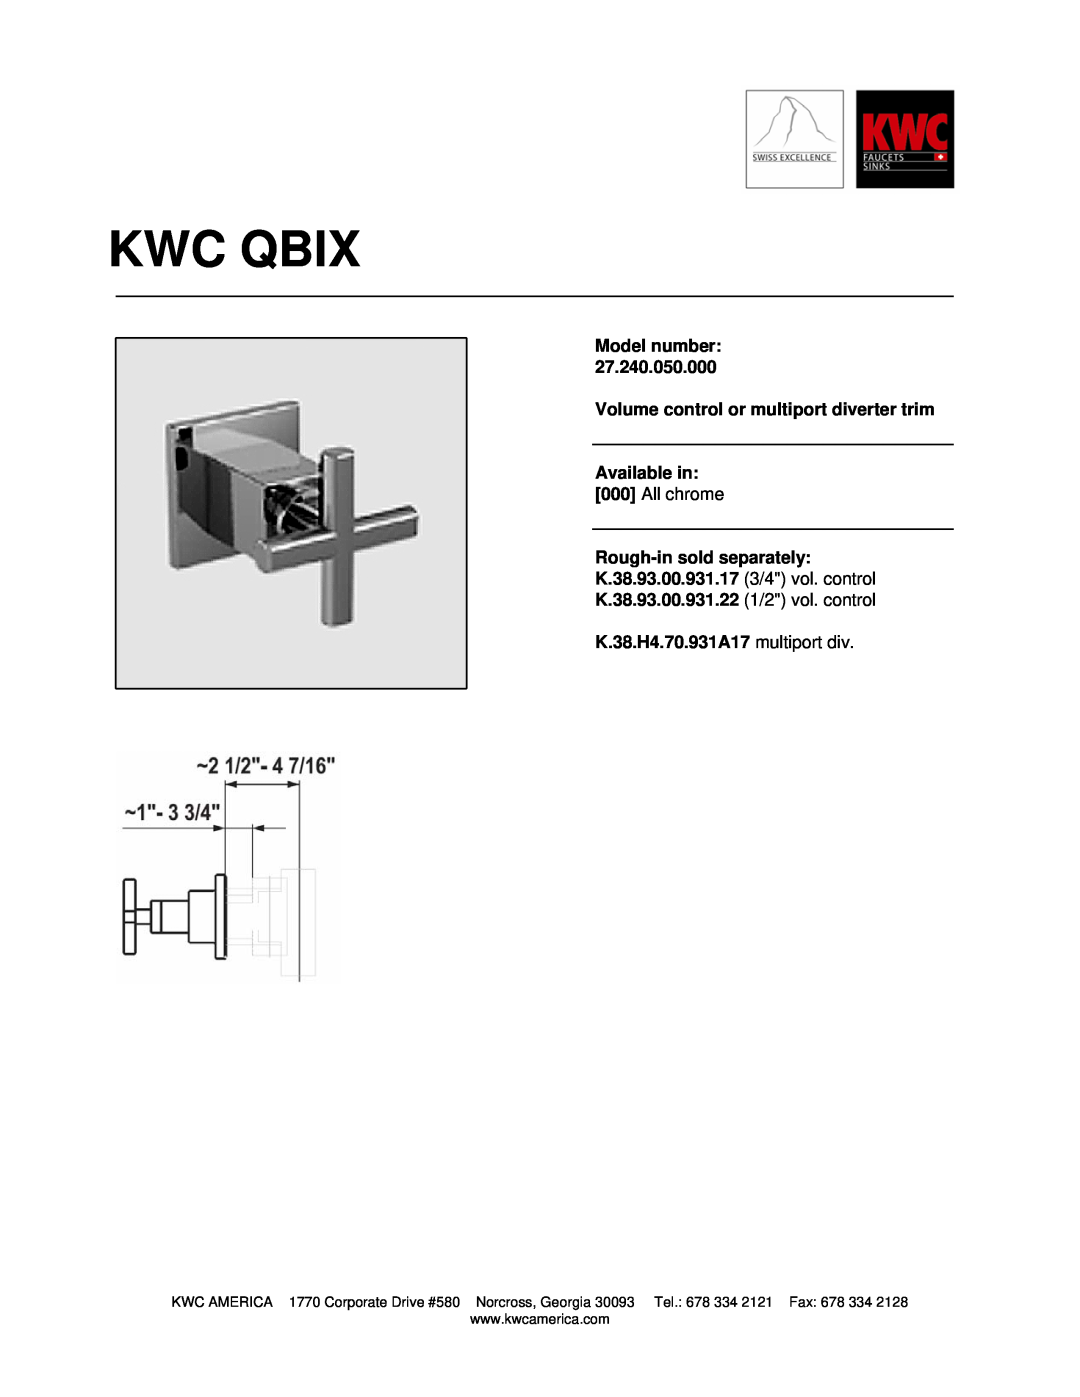 KWC 27.240.050.000 manual Kwc Qbix, Model number, Volume control or multiport diverter trim, Available in 000 All chrome 